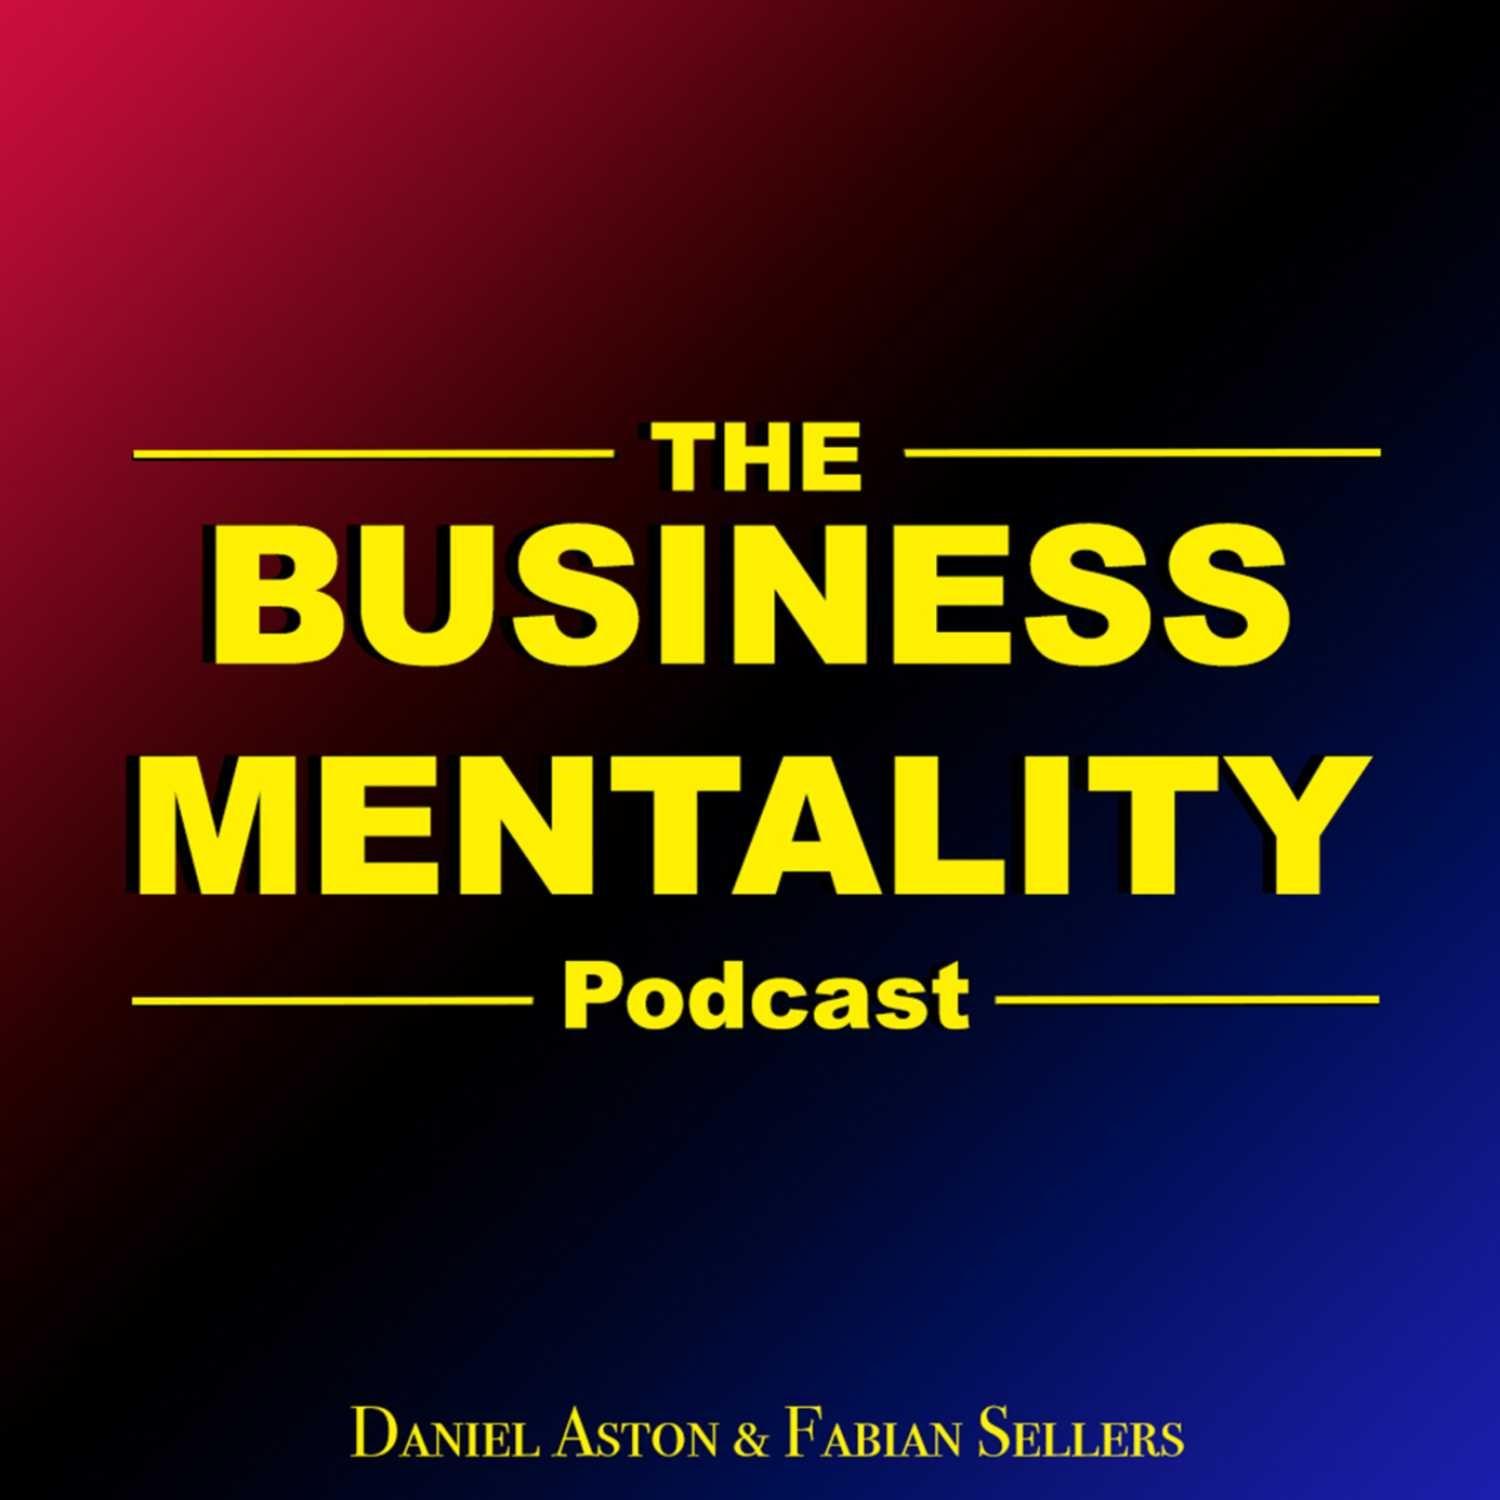 The Business Mentality Podcast